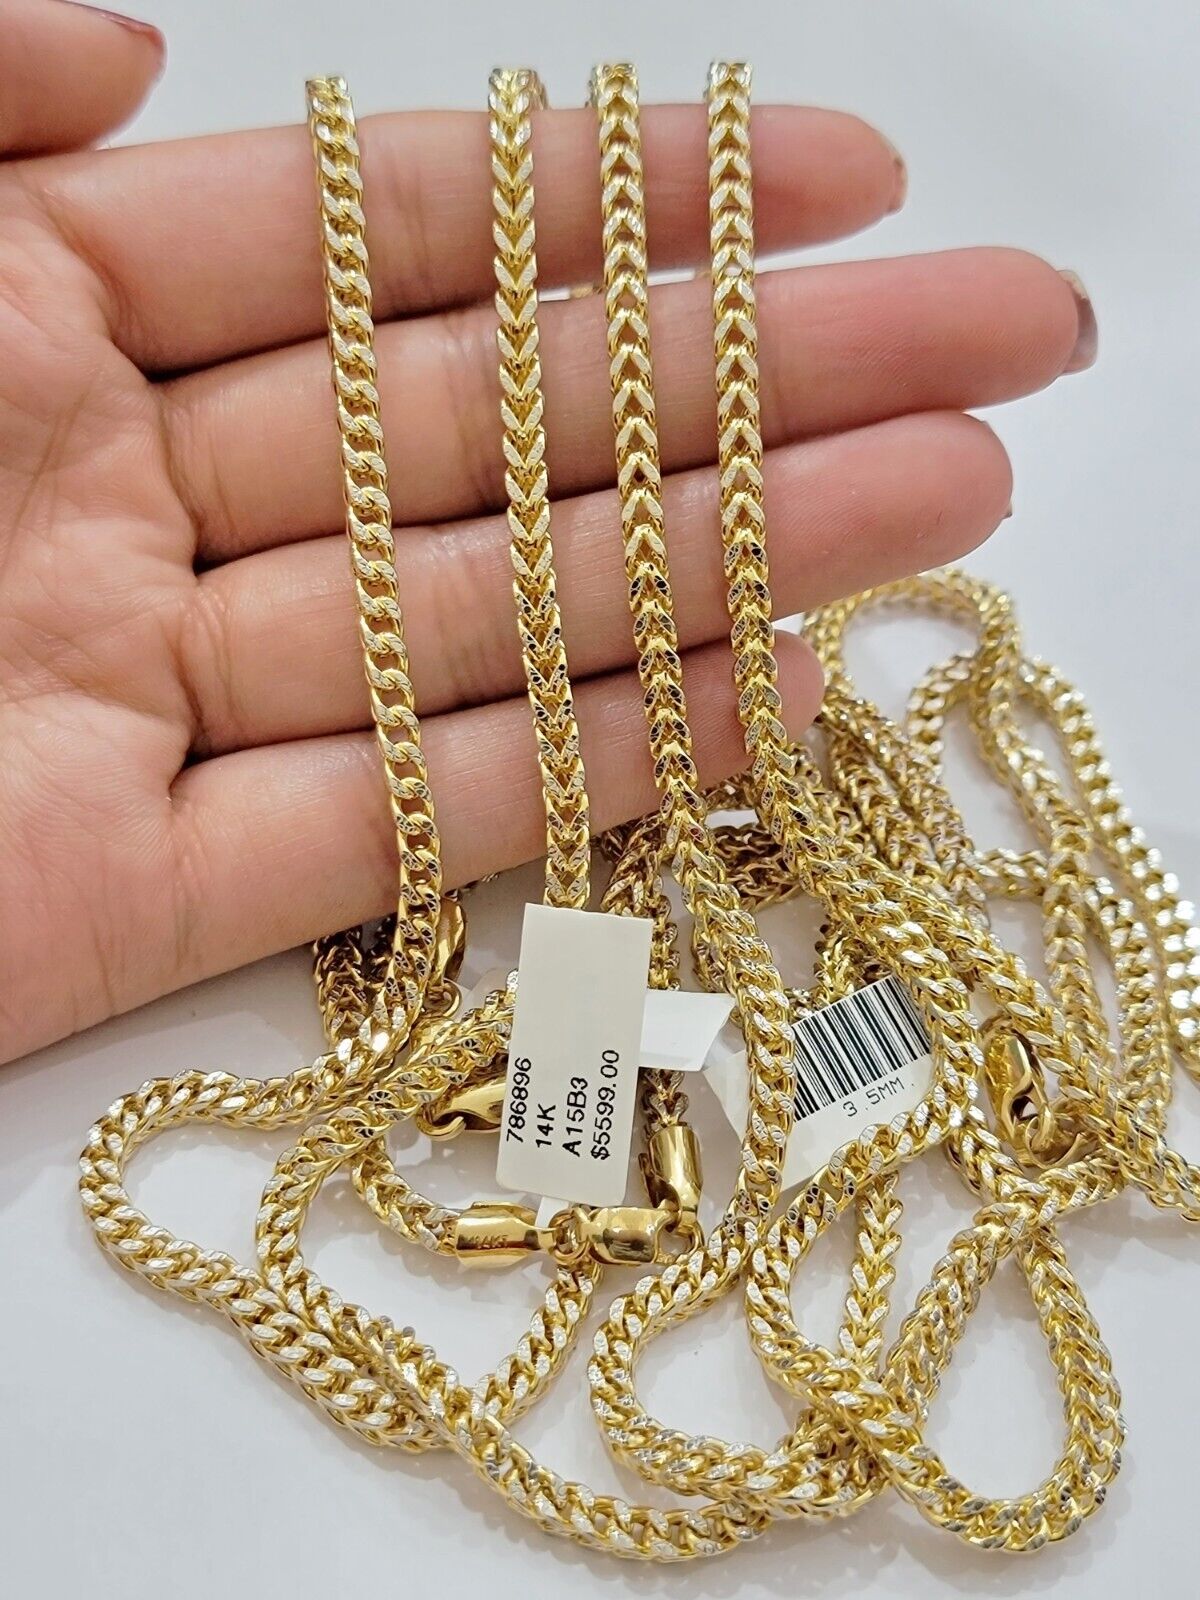 Real 14k Gold Franco Chain Necklace 22" Short 3.5mm Diamond cut 14kt Yellow Gold